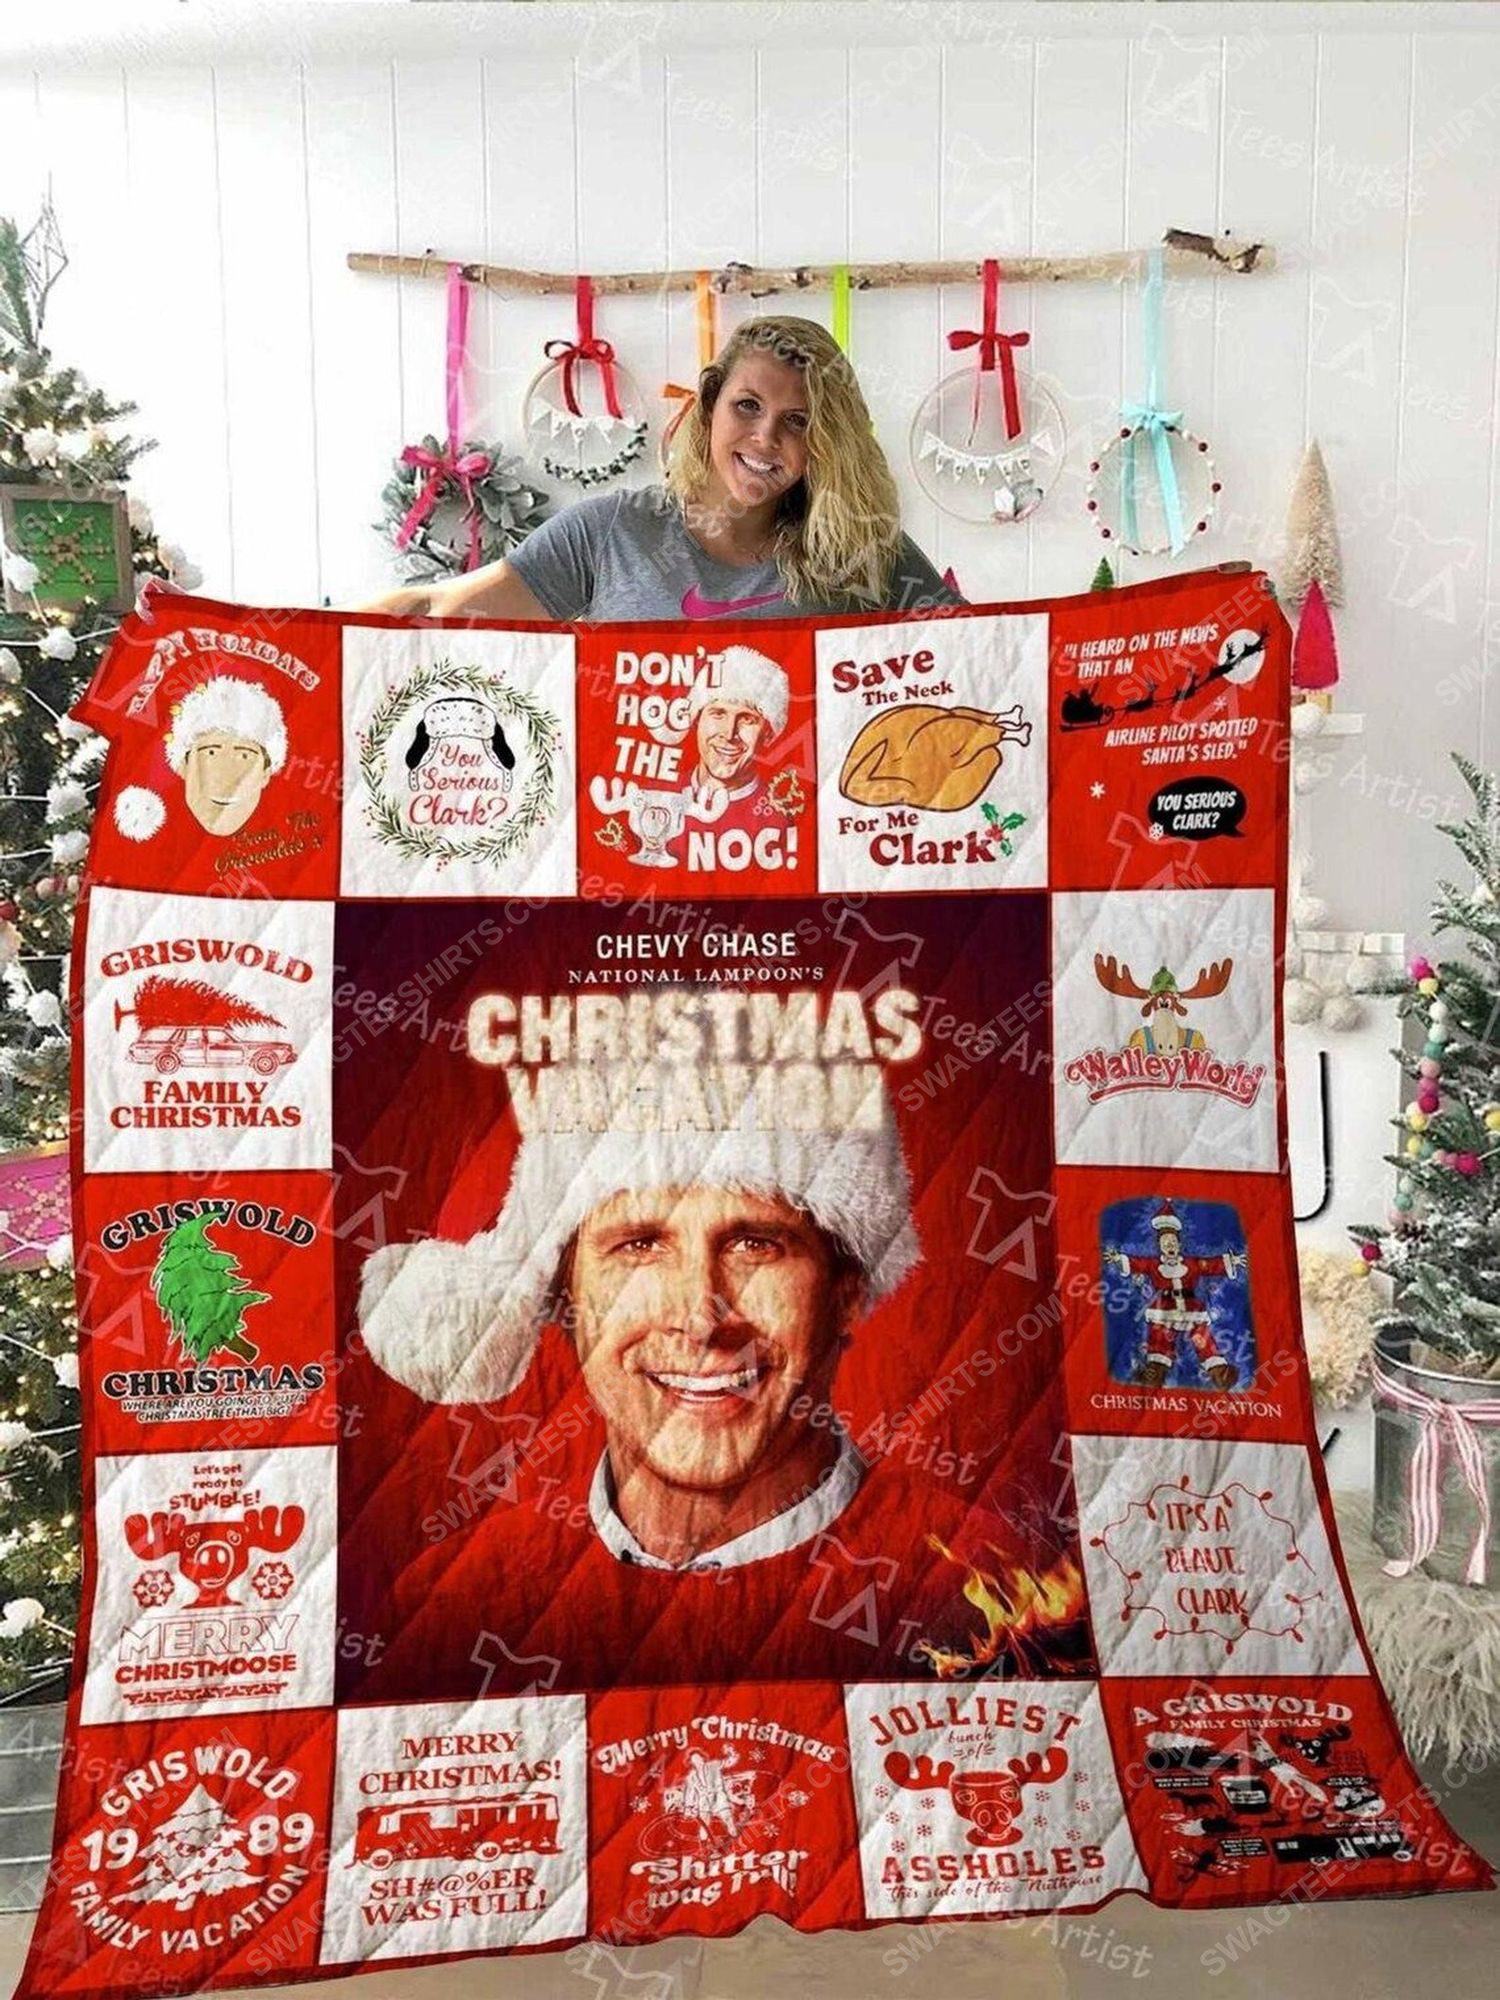 National lampoons christmas vacation griswold christmas blanket 2